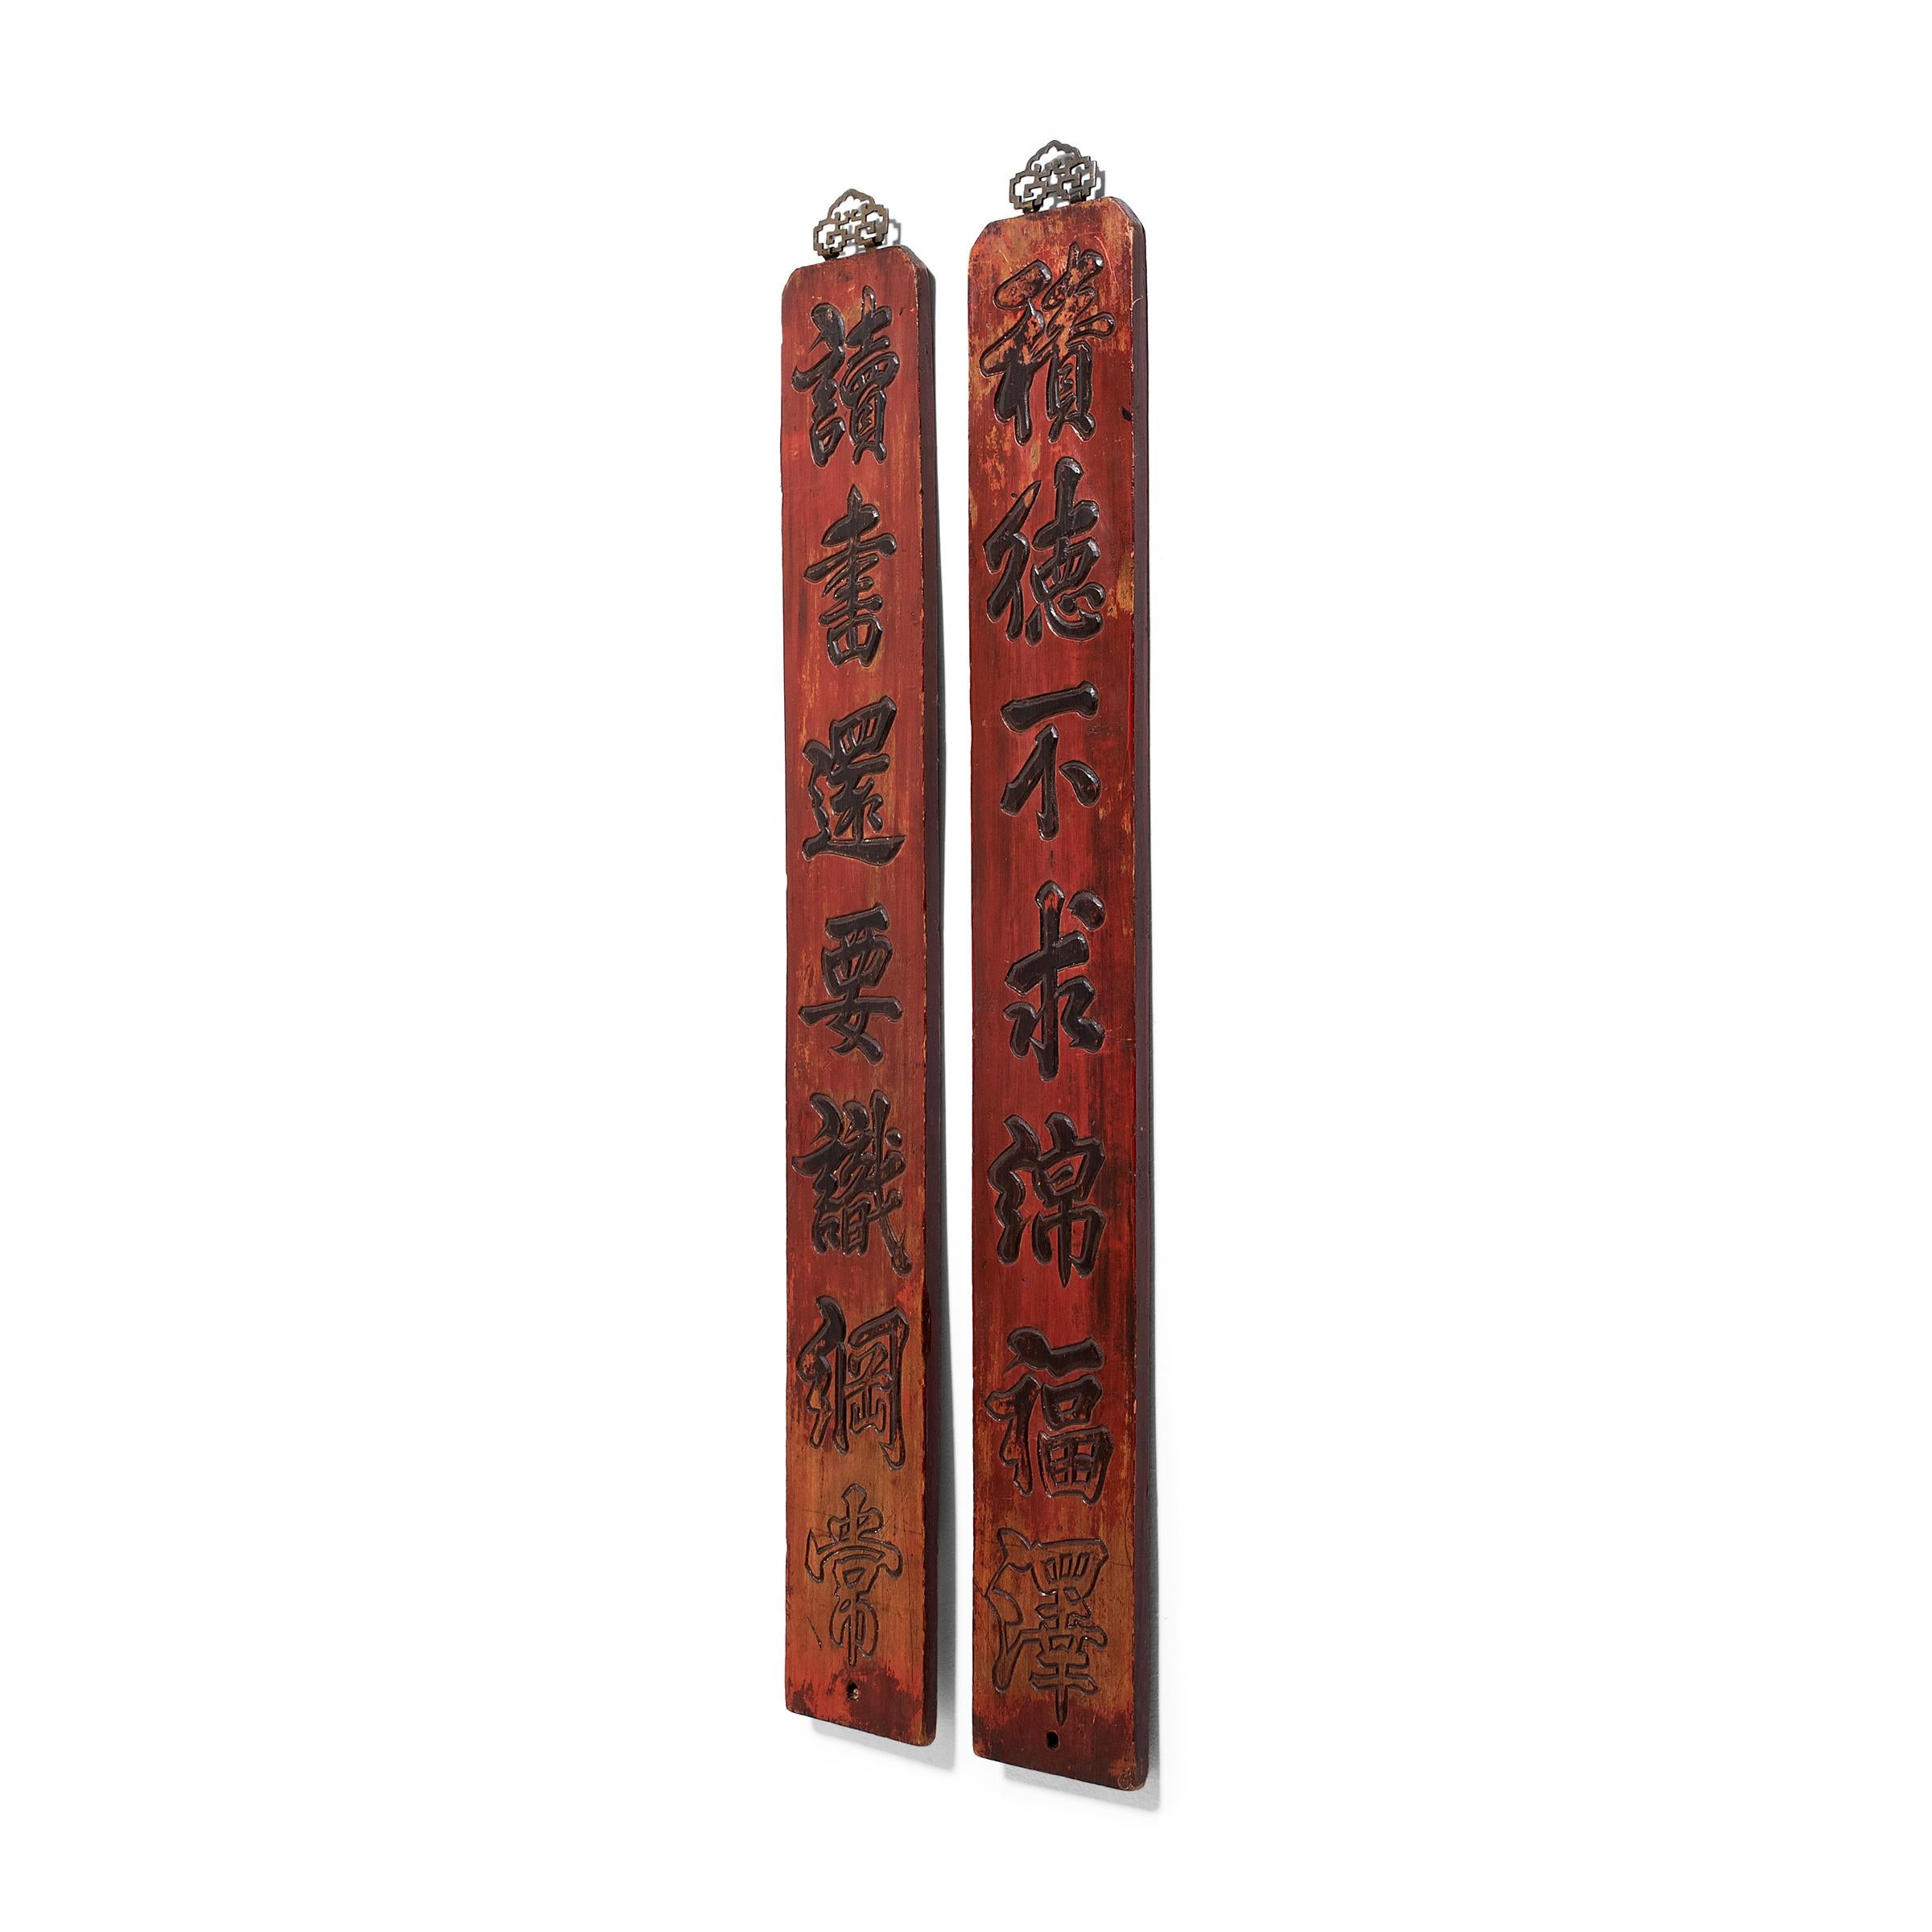 This pair of decorative red lacquer signs dates to the late 19th century and is carved in relief with a poetic couplet. Carved to resemble ink calligraphy, the couplet reads: 